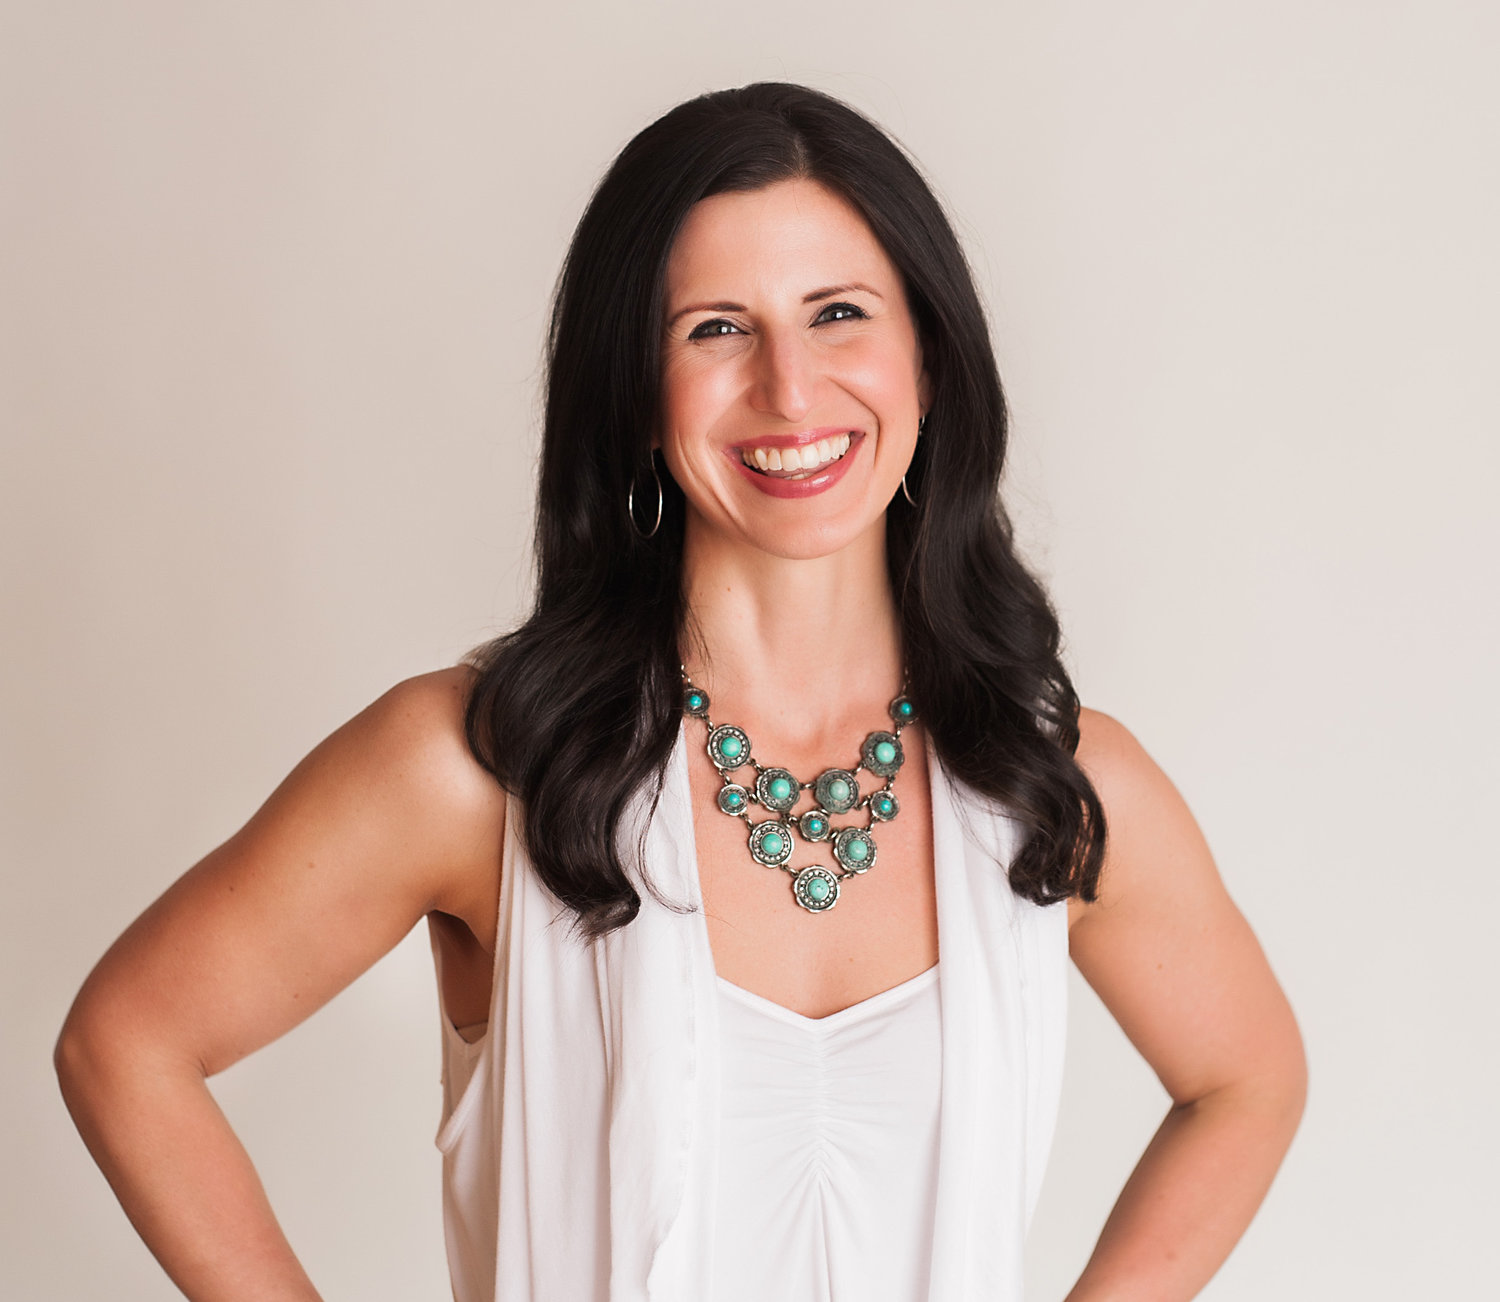 Embody Movement Studio & Lifestyle Boutique founder and owner Christina Mae Wolf.